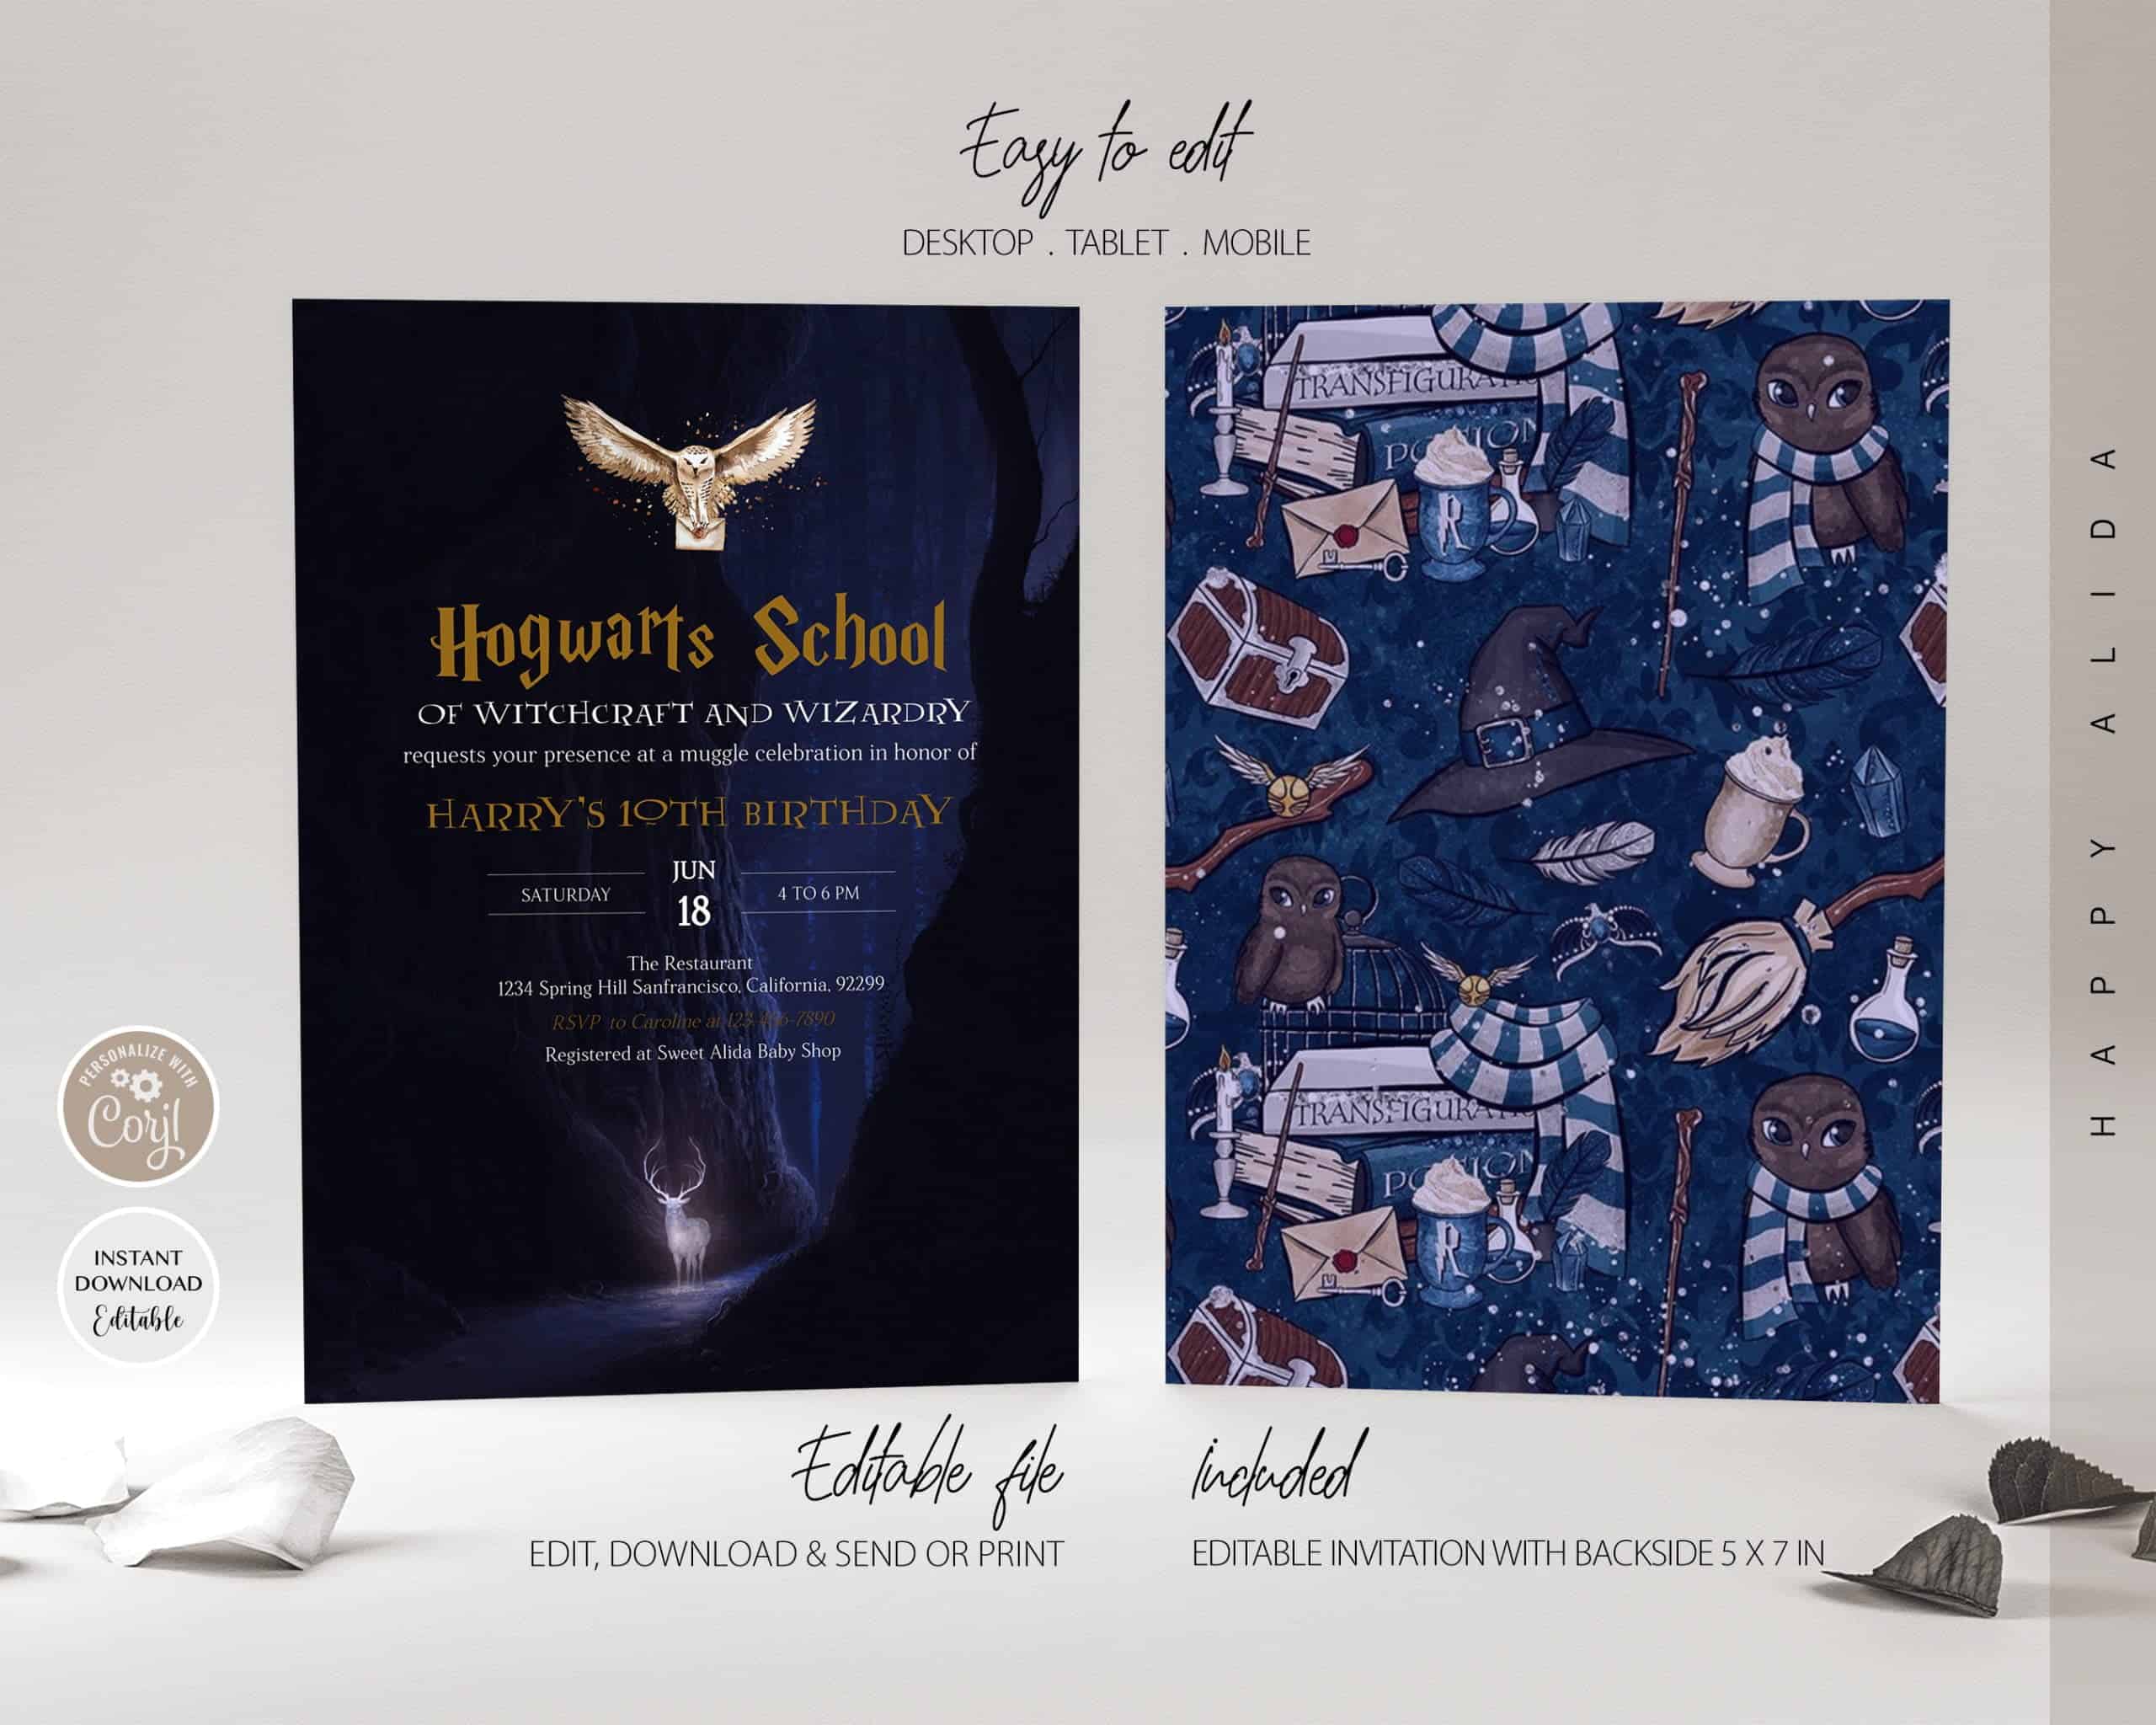 DIY Harry Potter Invitations You Can Print From Home  Harry potter  invitations, Harry potter birthday invitations, Harry potter party  invitations